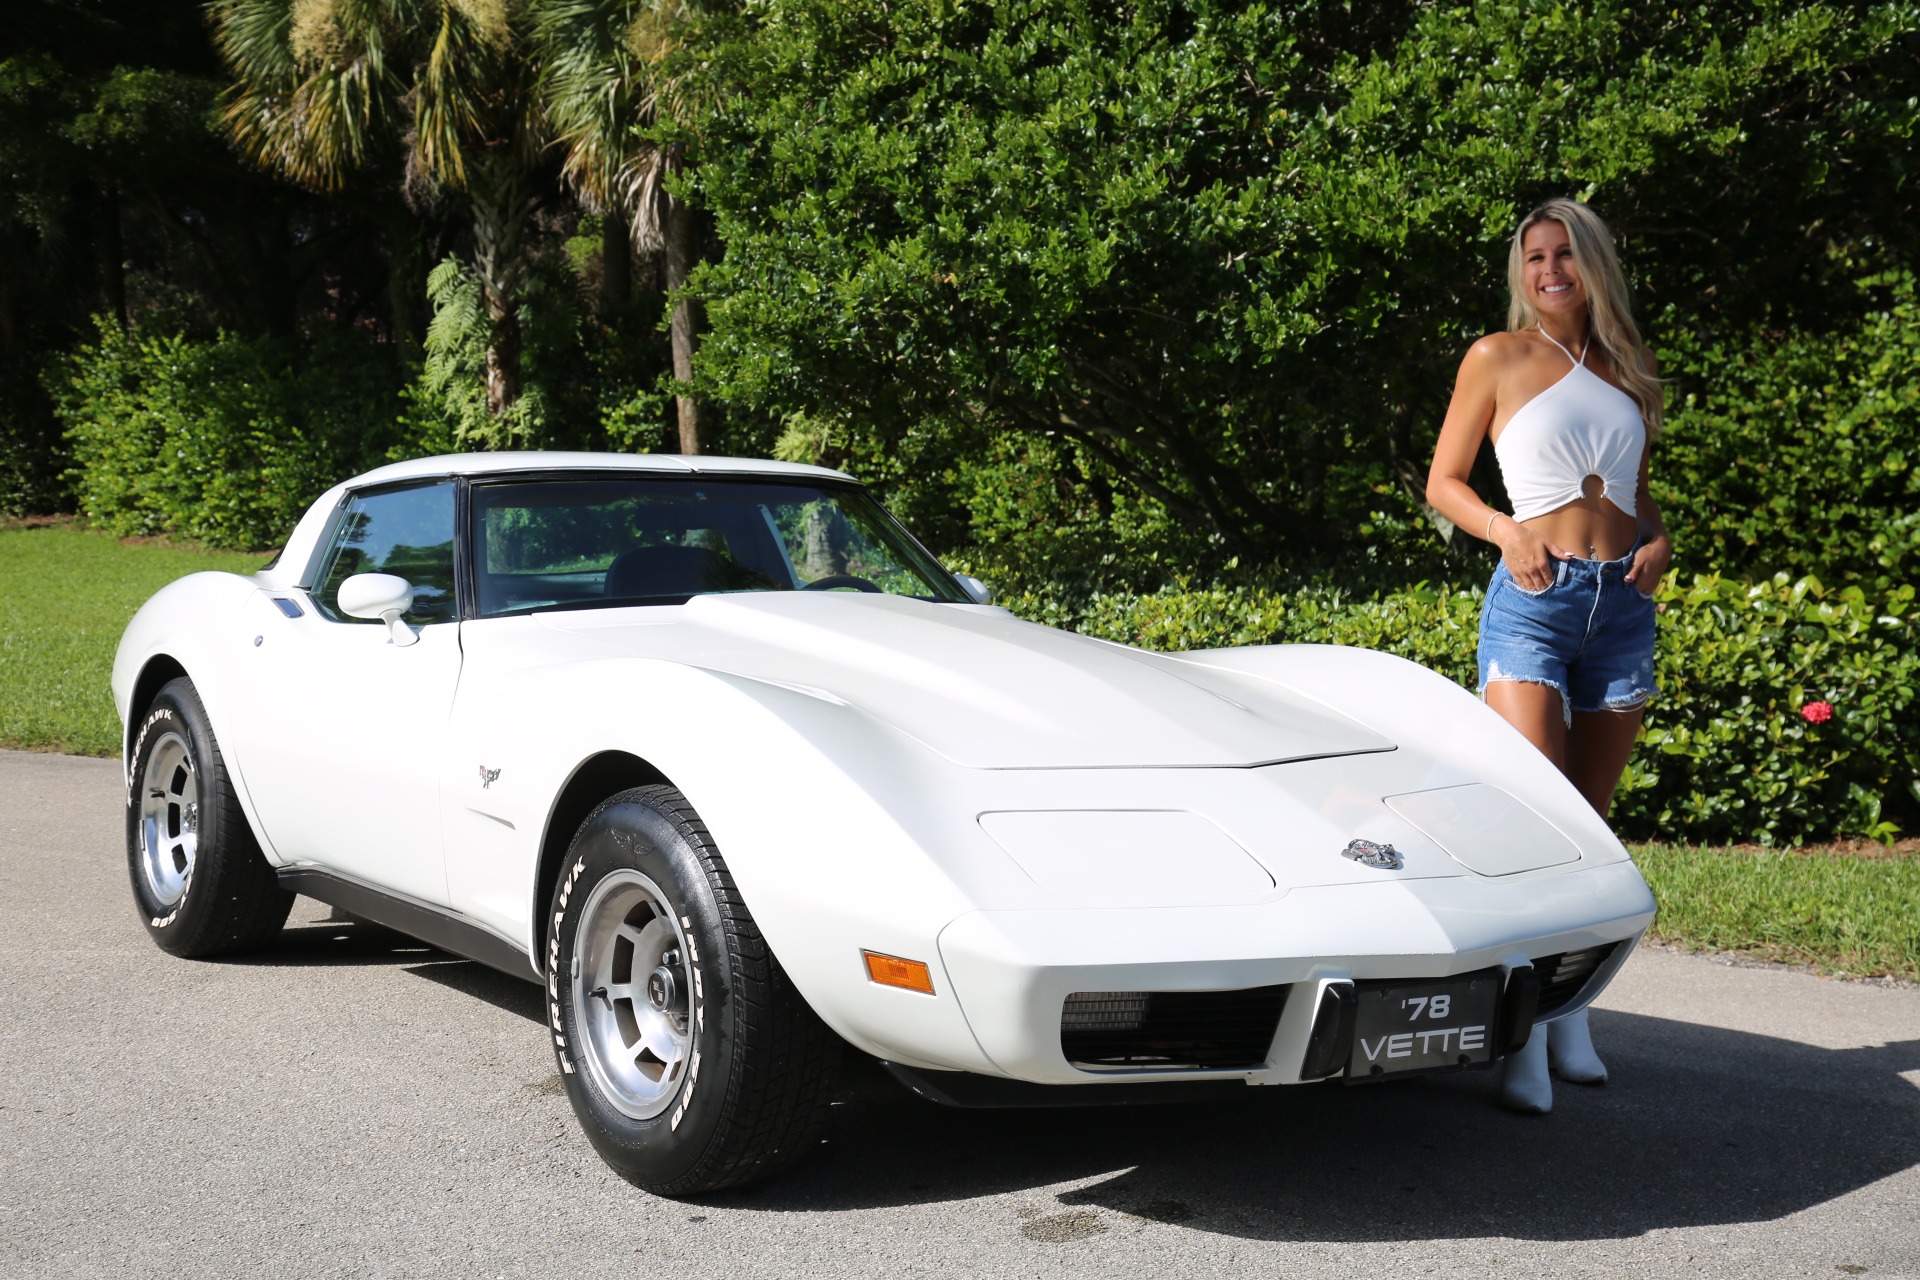 Used 1978 Chevrolet Corvette Anniversary Edition for sale Sold at Muscle Cars for Sale Inc. in Fort Myers FL 33912 6